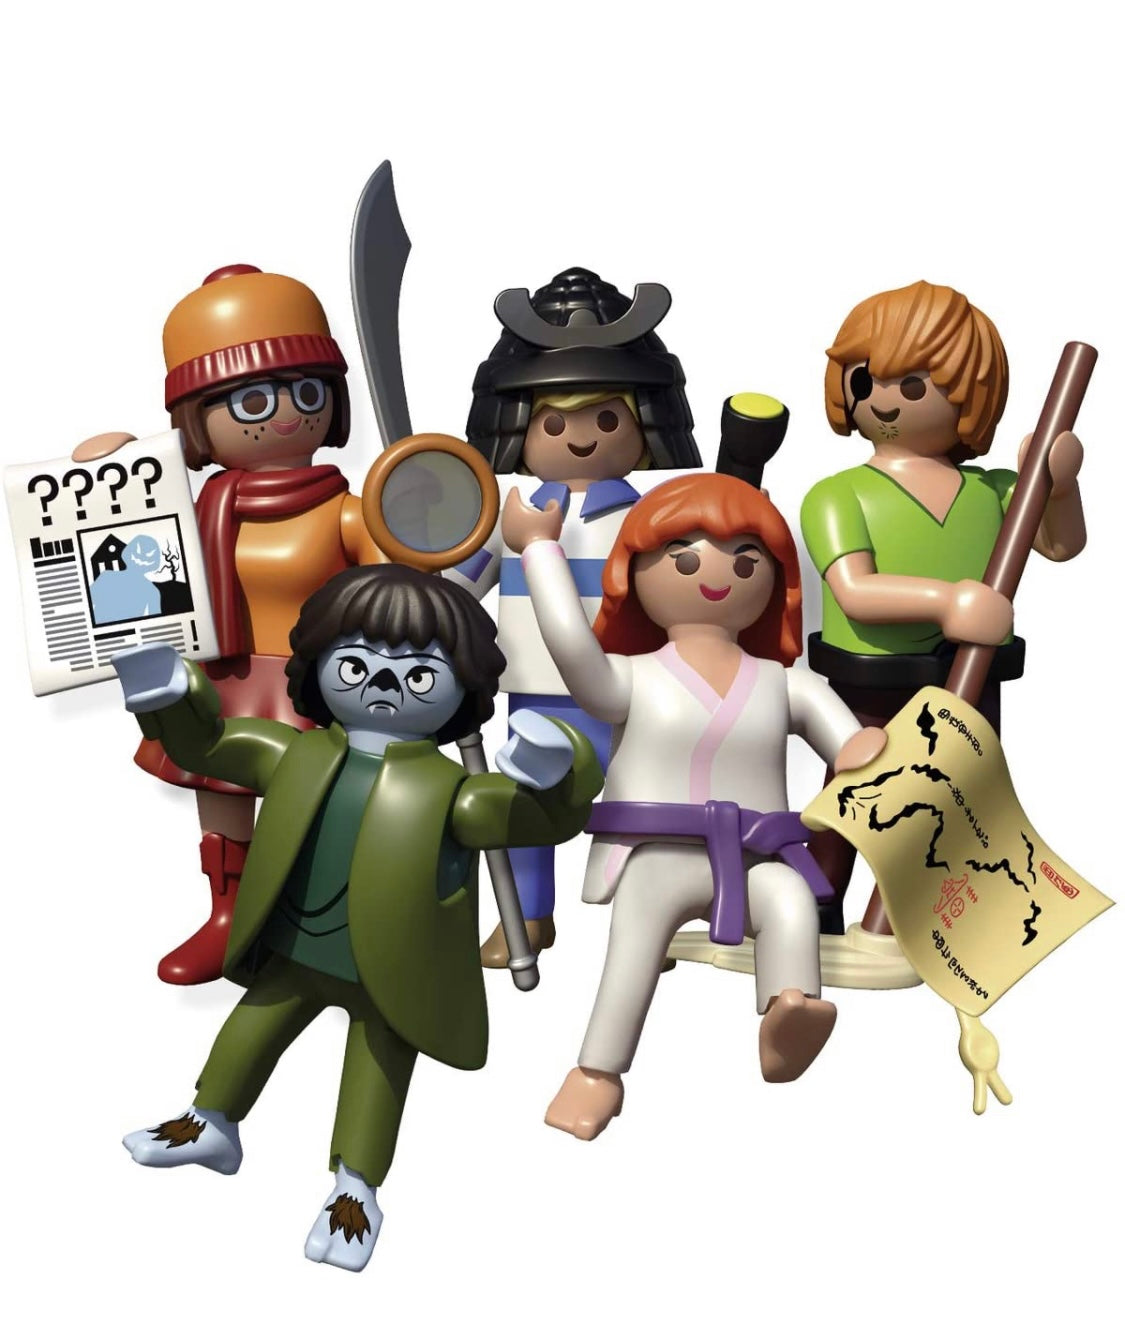 Playmobil Scooby-Doo 12 Characters to collect